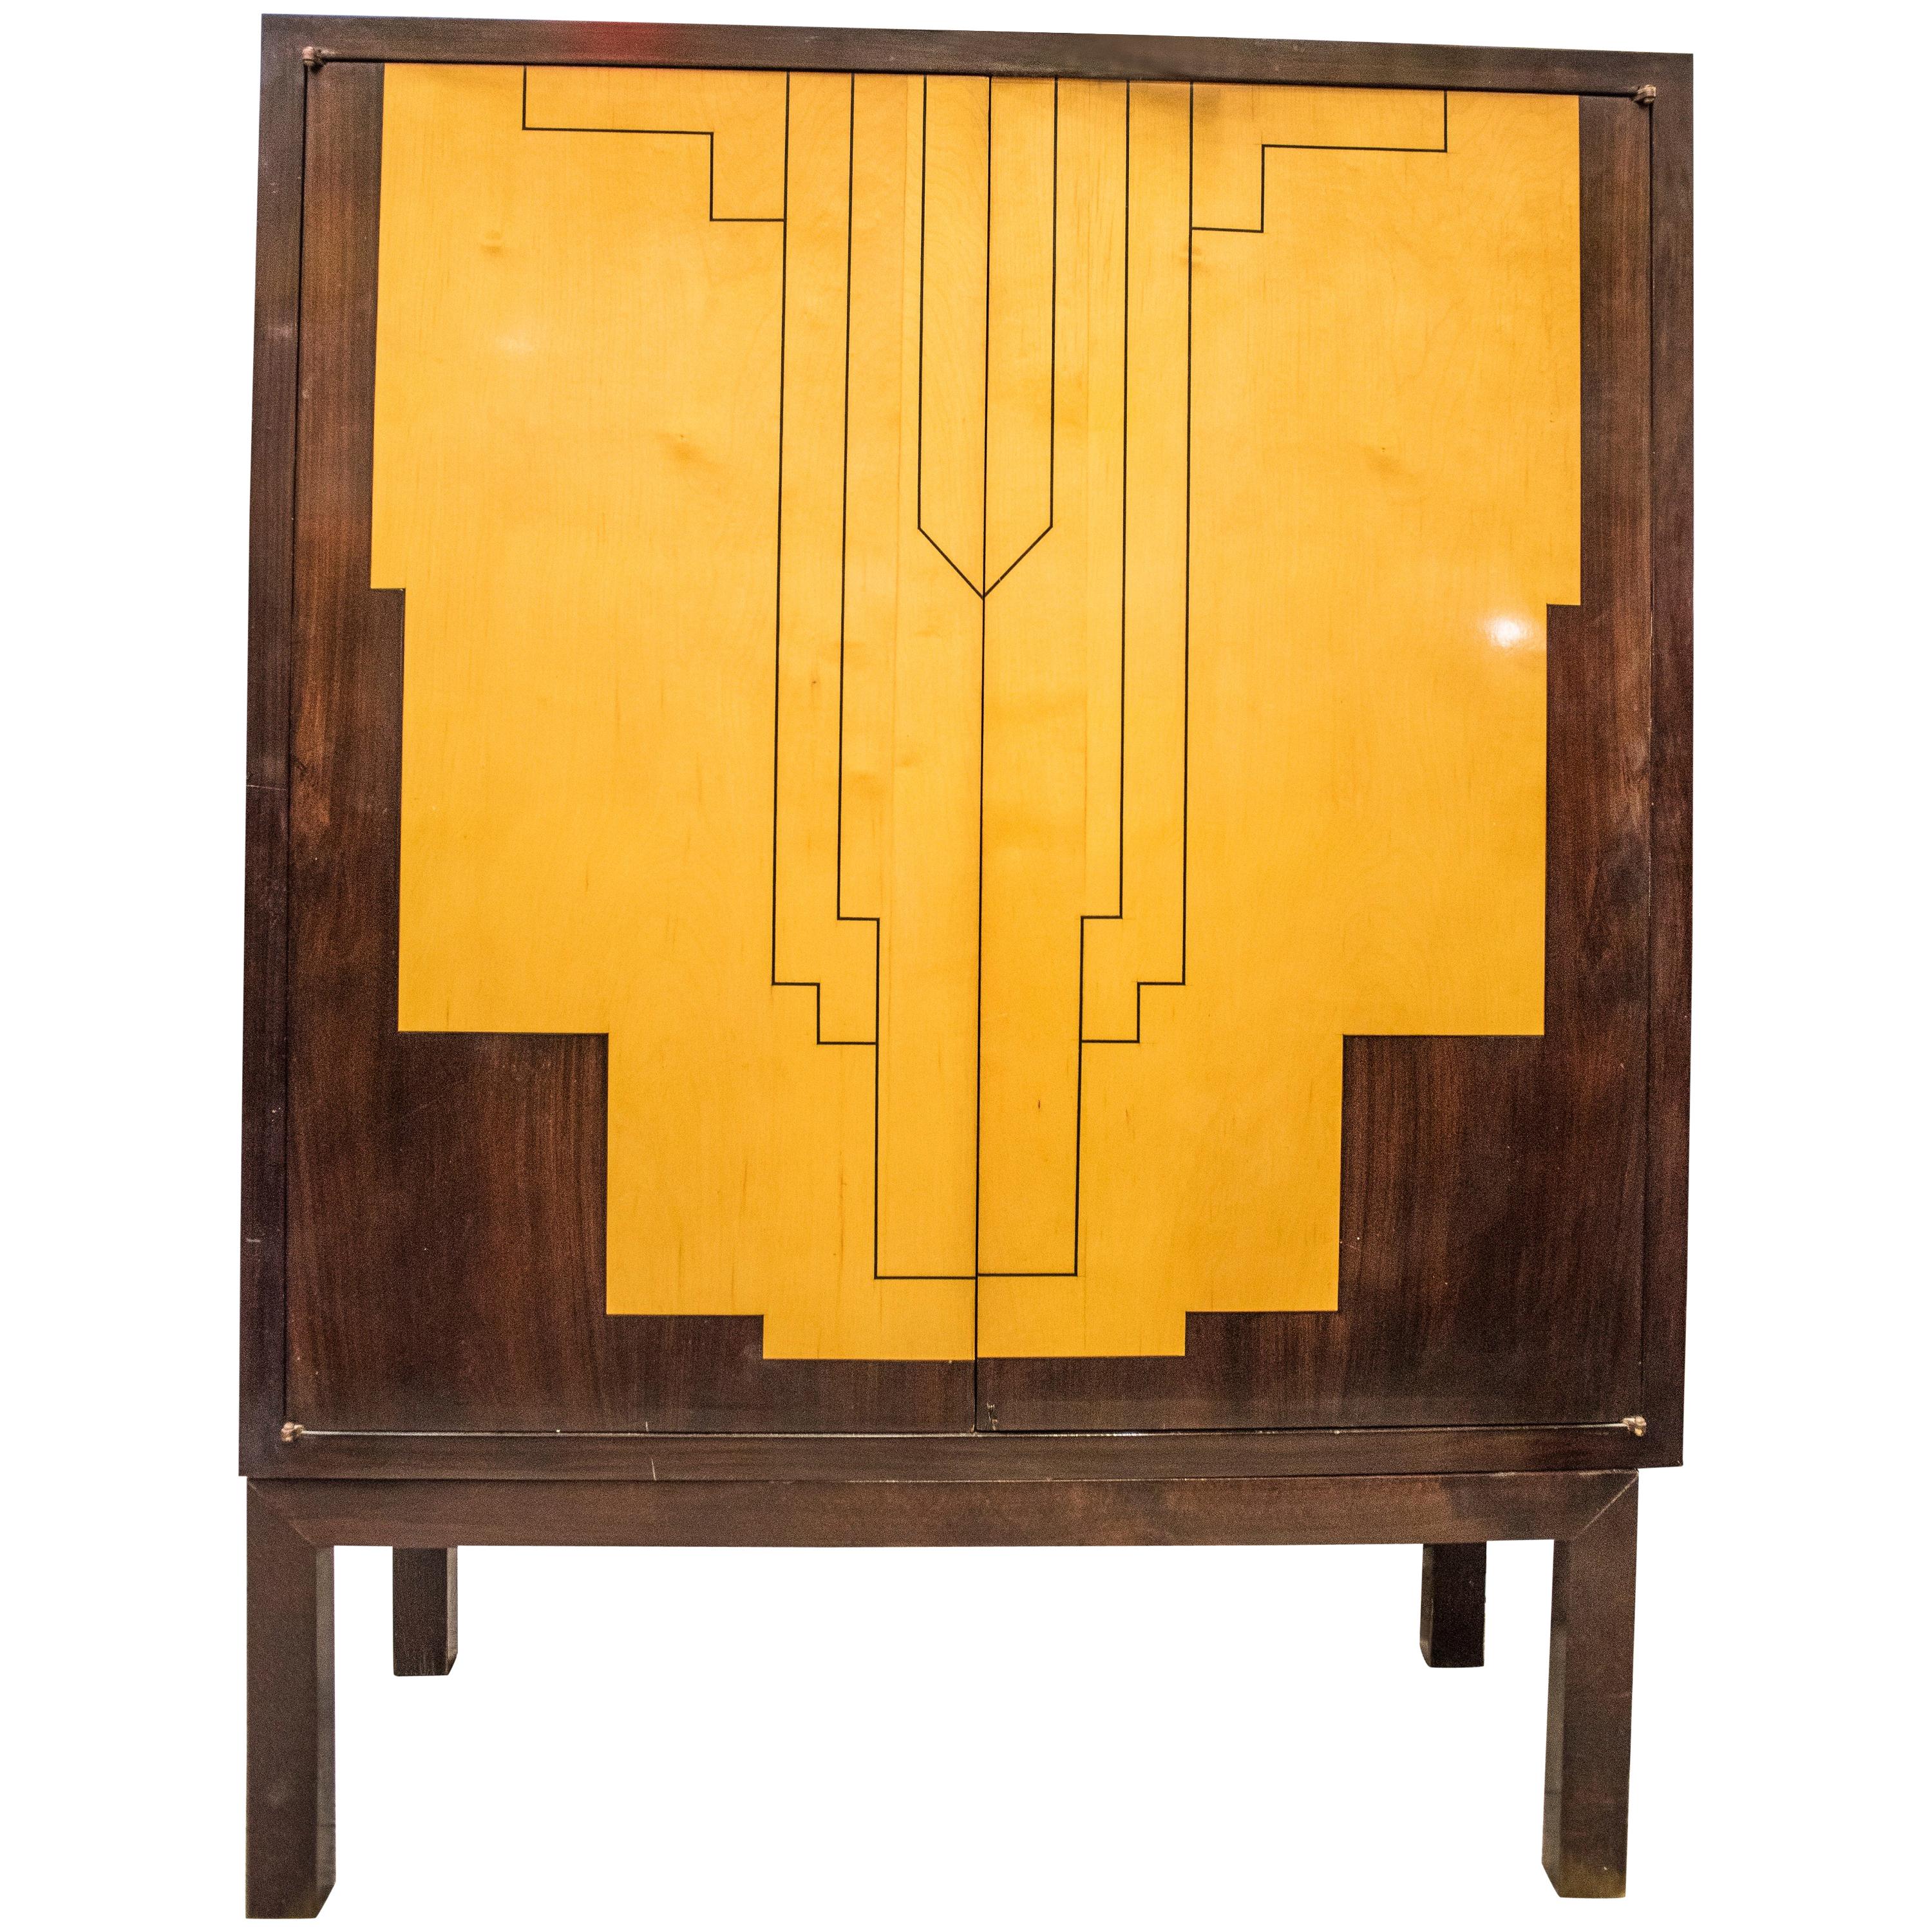 1940s French Art-Deco Style Lemongrass and Rosewood Cabinet